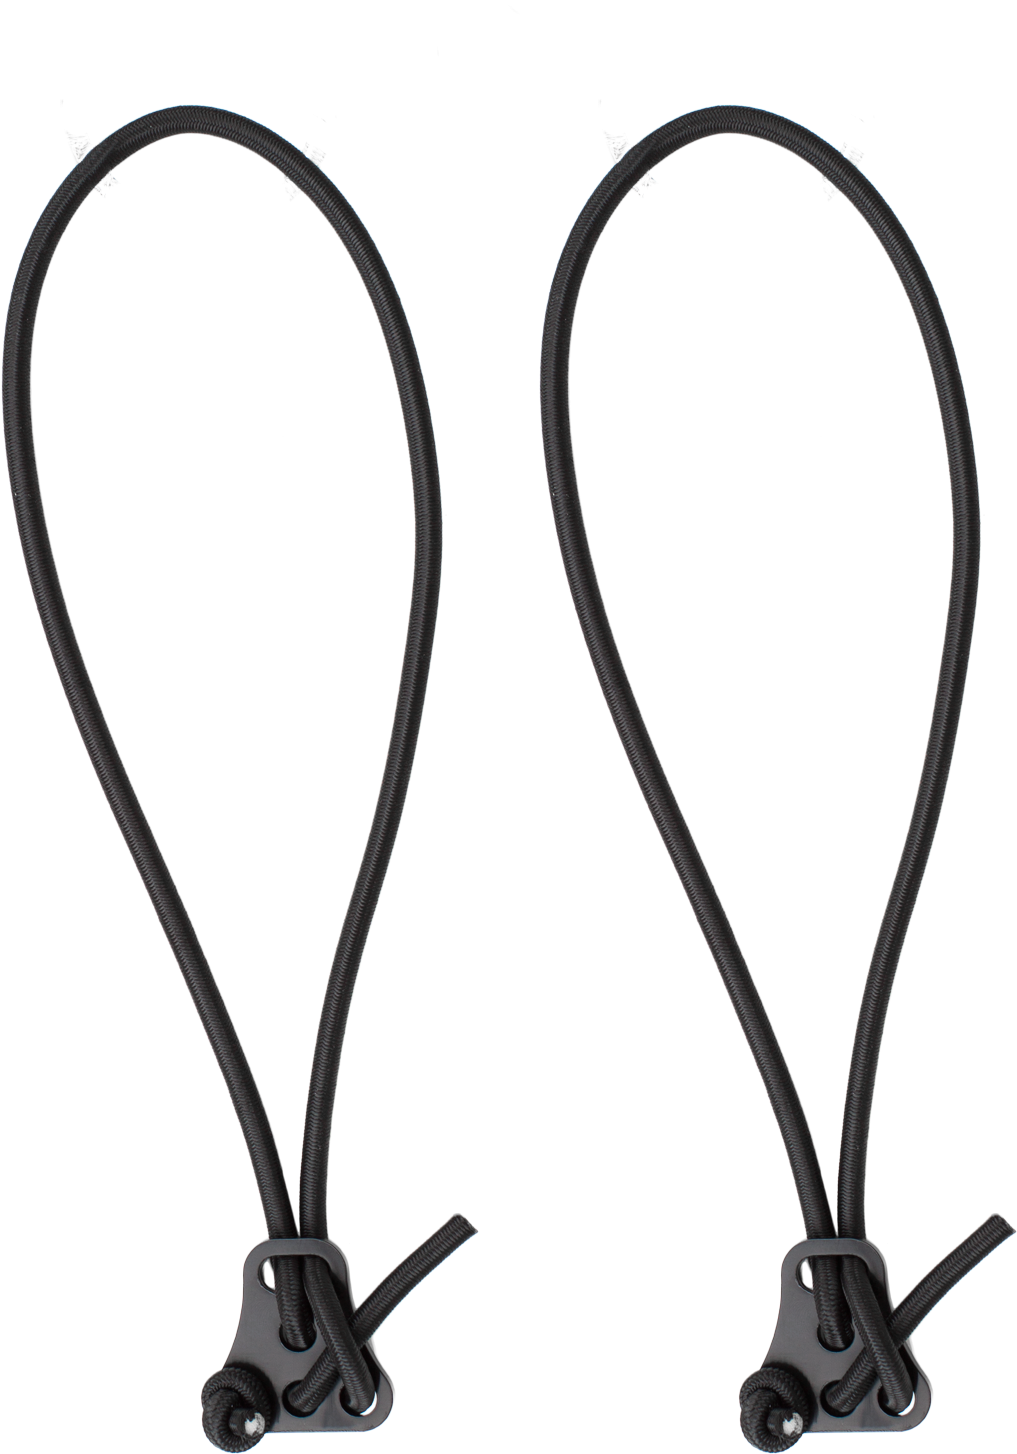 A Pair Of Black Cables